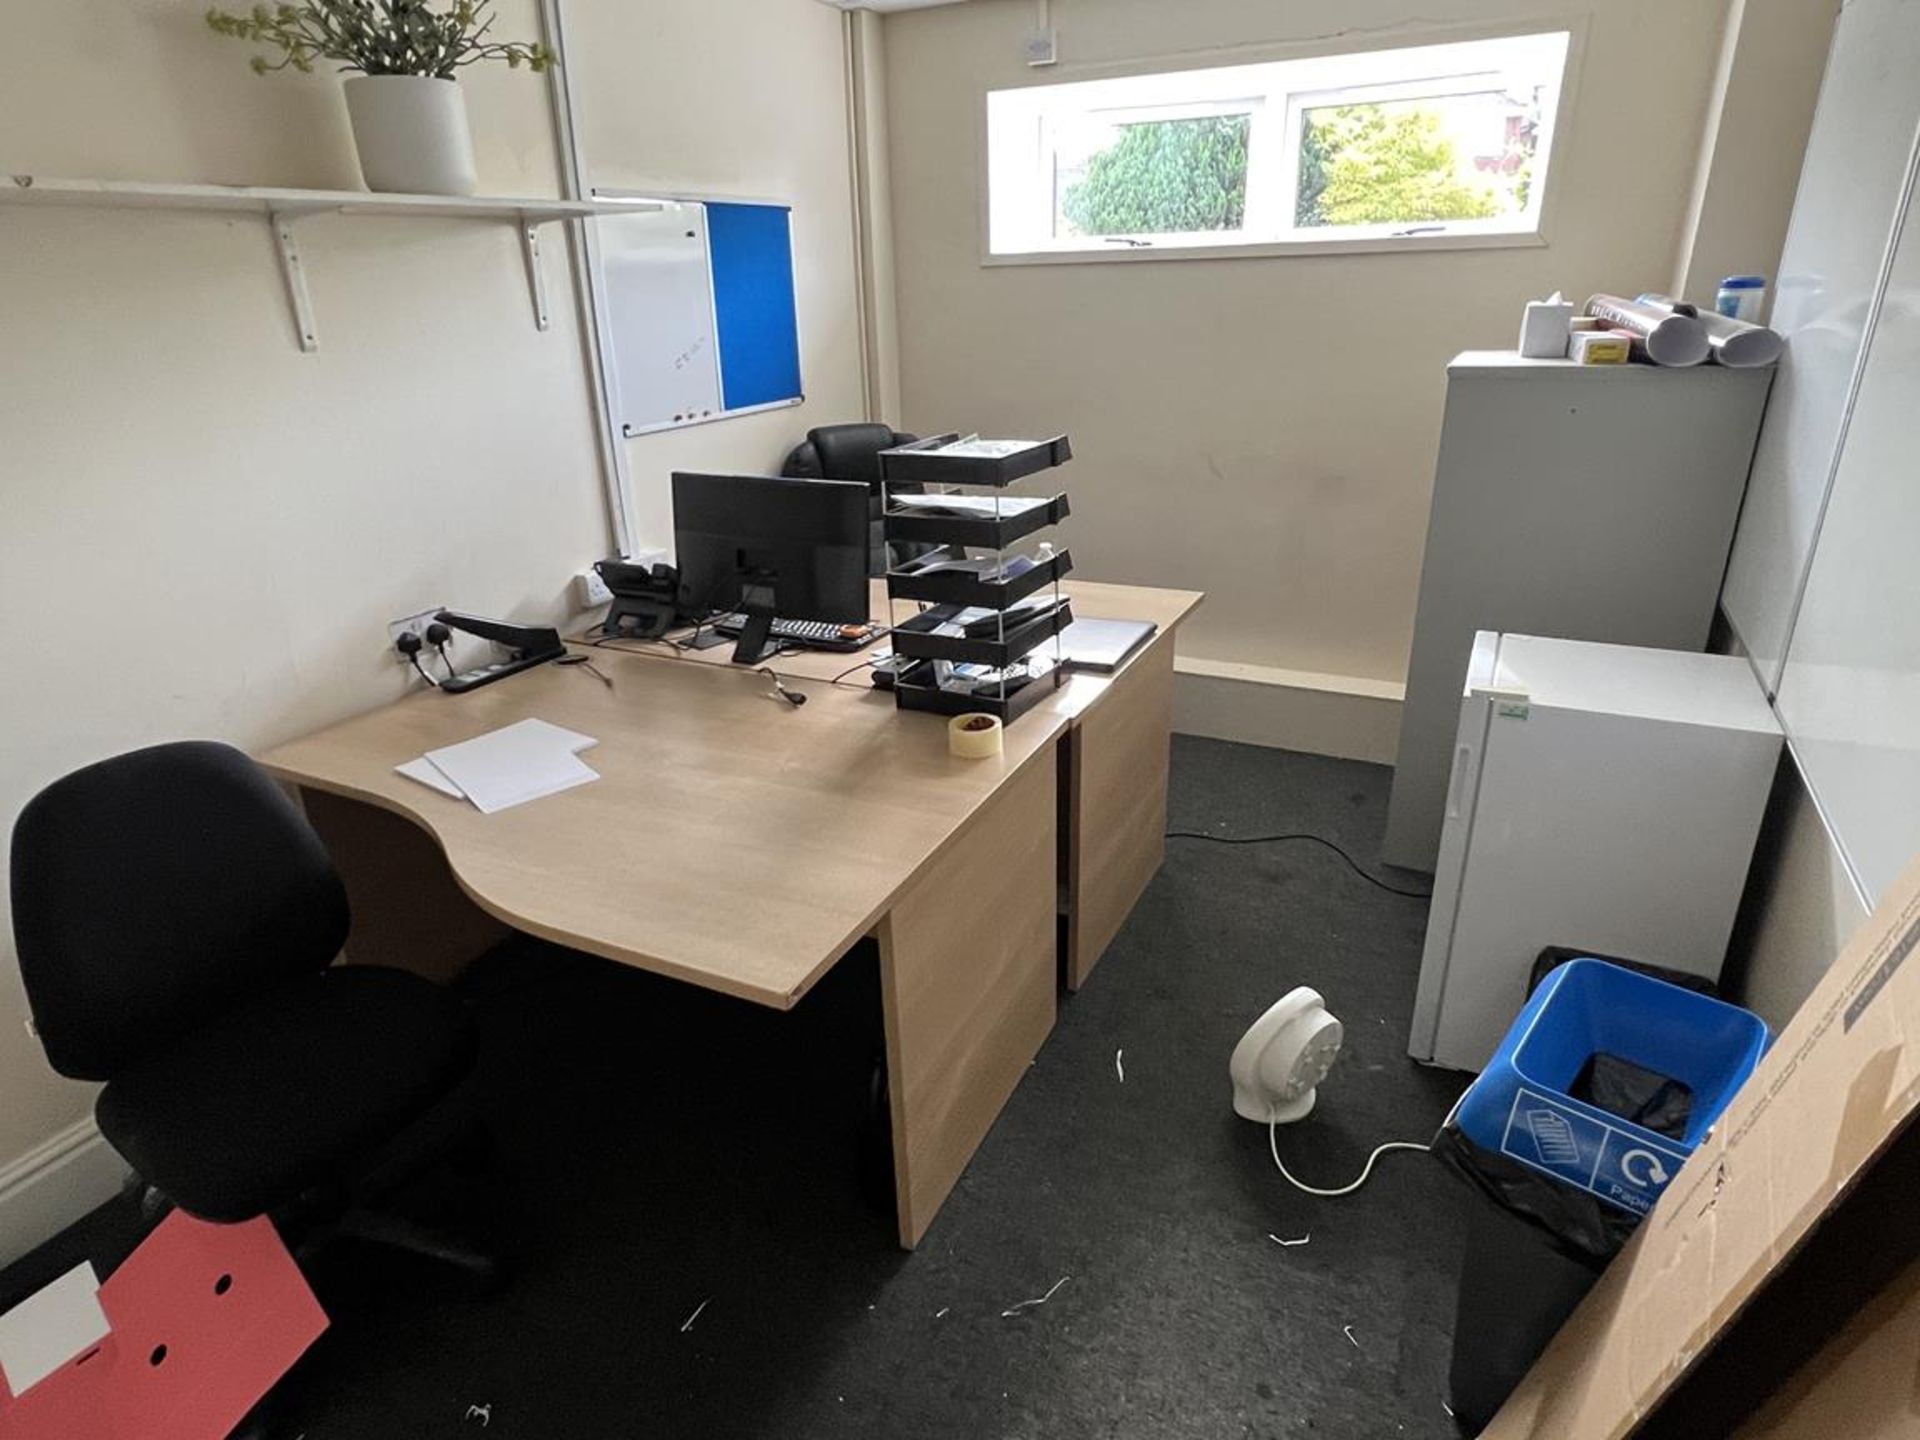 Furniture contents of the test kitchen office to include laminate office desks, steel filing cabinet